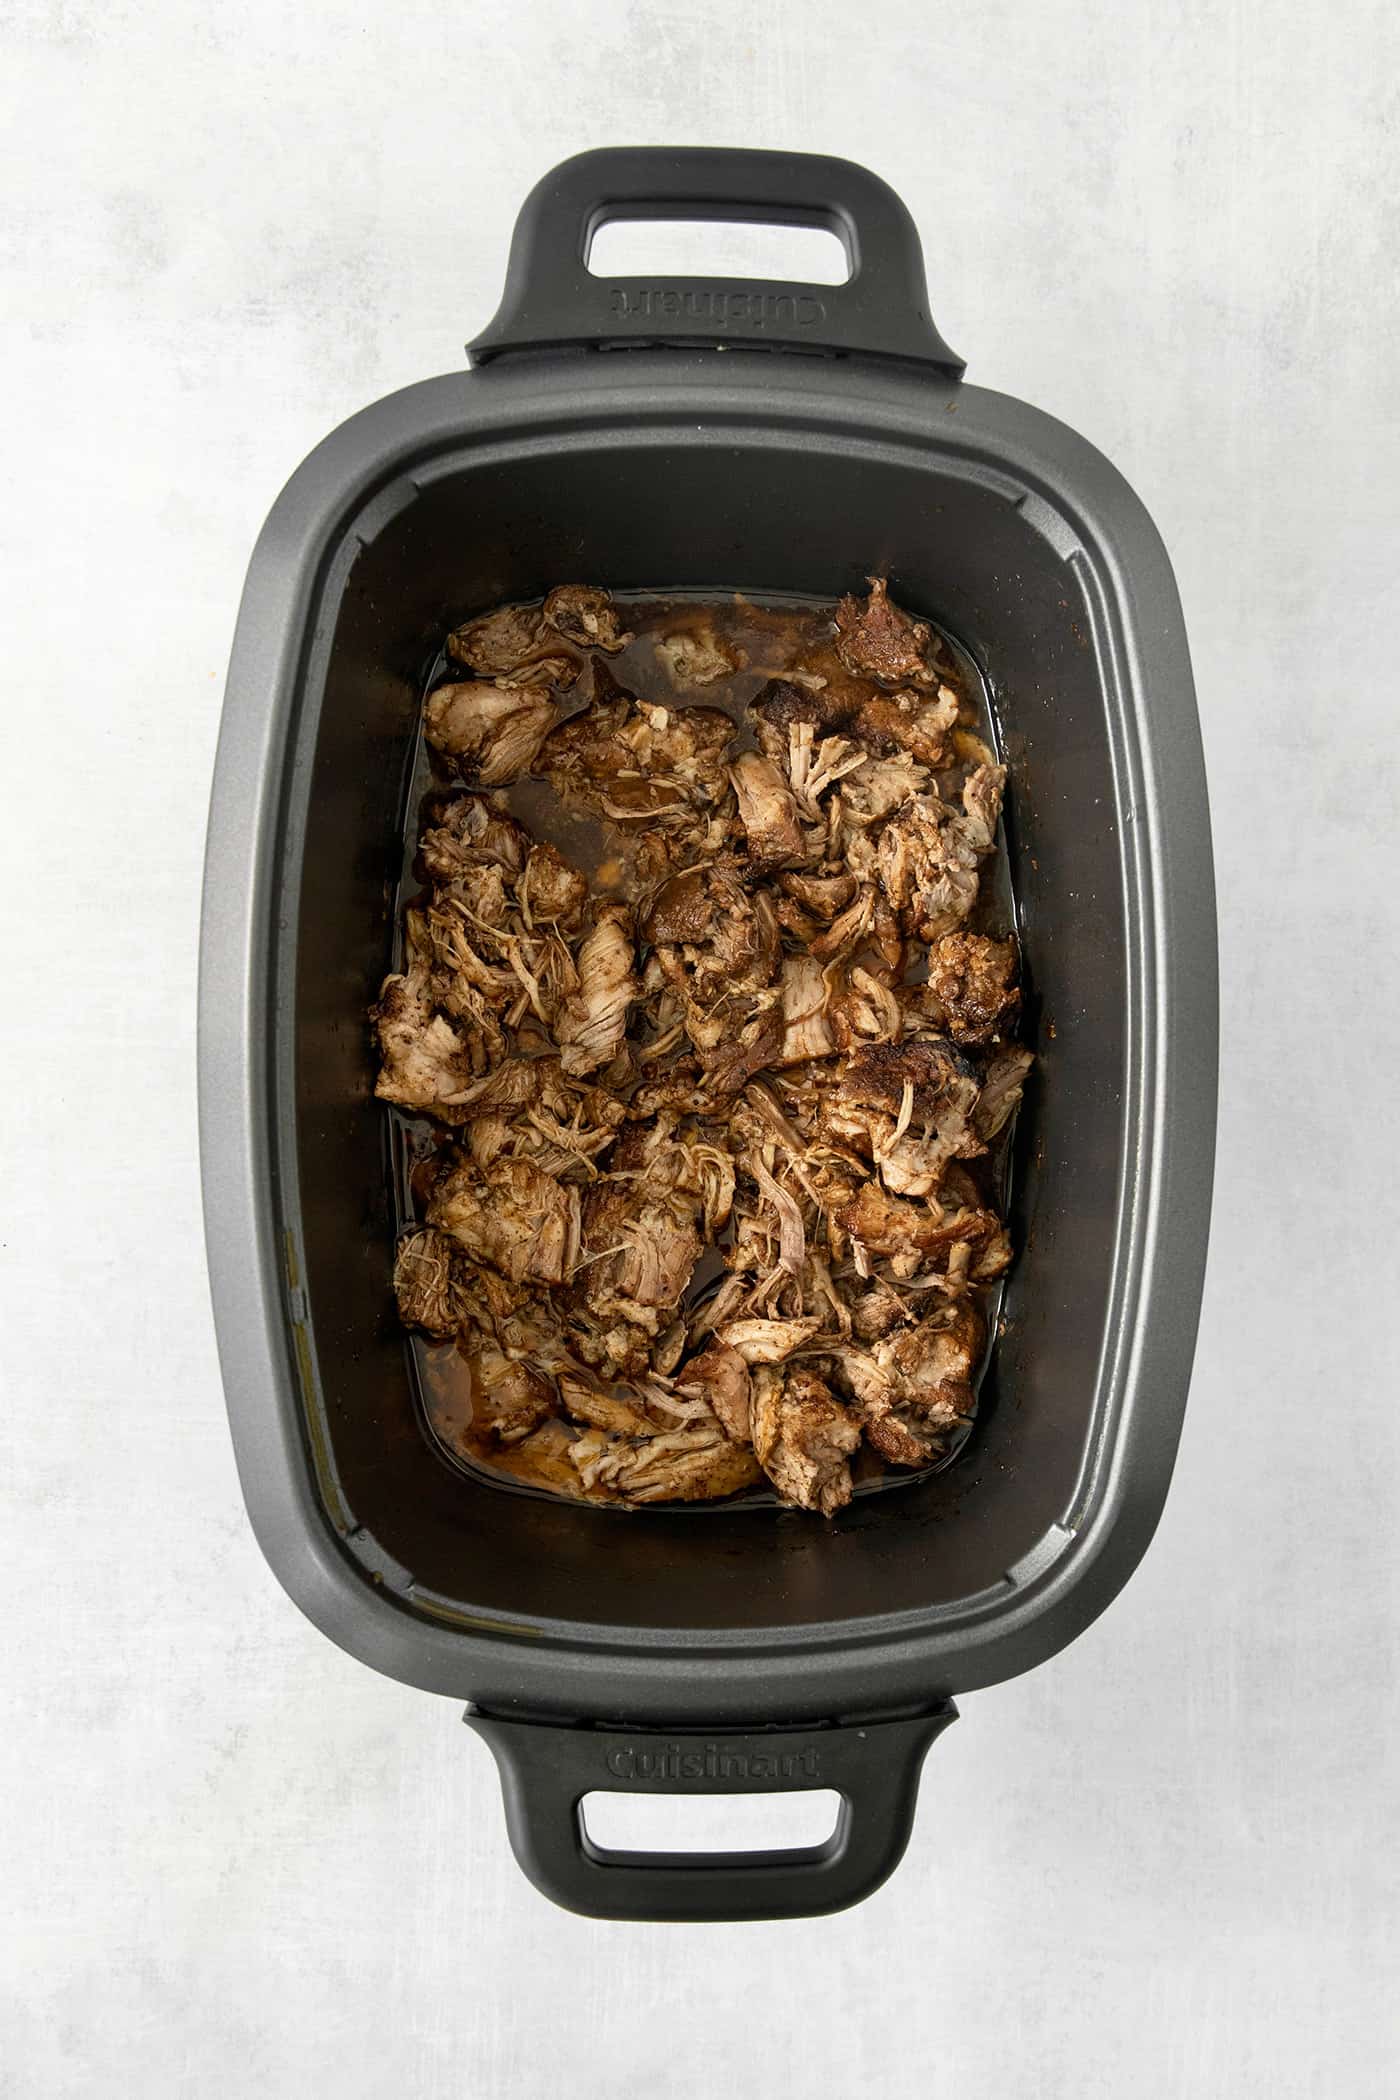 Pork cooks in a slow cooker